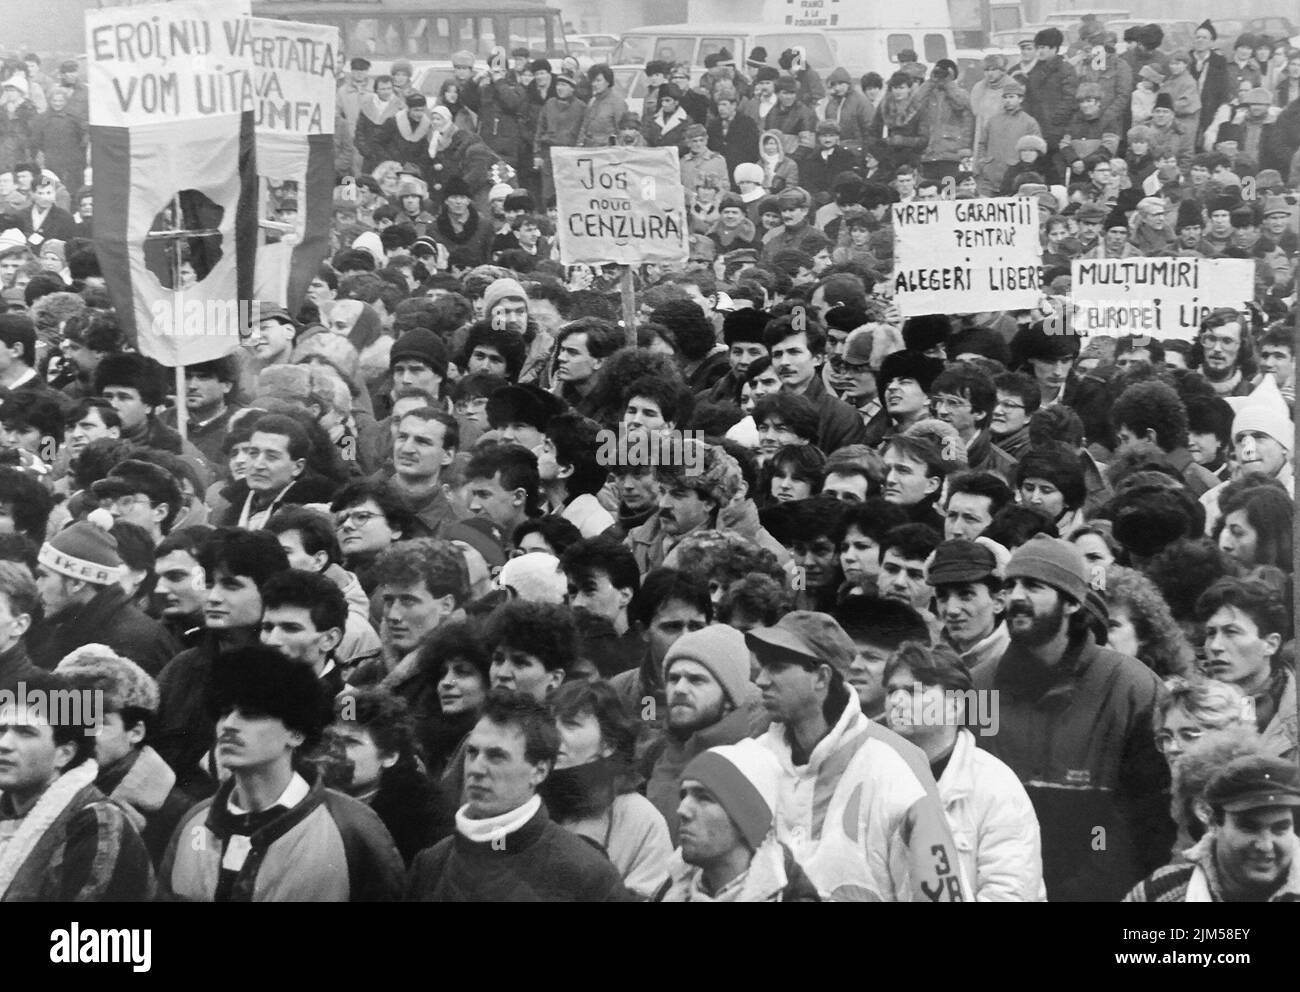 Bucharest, Romania, January 1990. Rally in the University Square following the Romanian Revolution of 1989. People would gather daily to protest the ex-communist officials that grabbed the power after the Revolution. The Romanian flag with the Socialist emblem cut off was an anti-communist symbol during the revolution. Banners saying 'Our heroes, we will never forget you', 'Freedom will triumph', 'Down with the new censorship', 'We want assurances for free elections', 'Thank you, Radio Free Europe'. Stock Photo